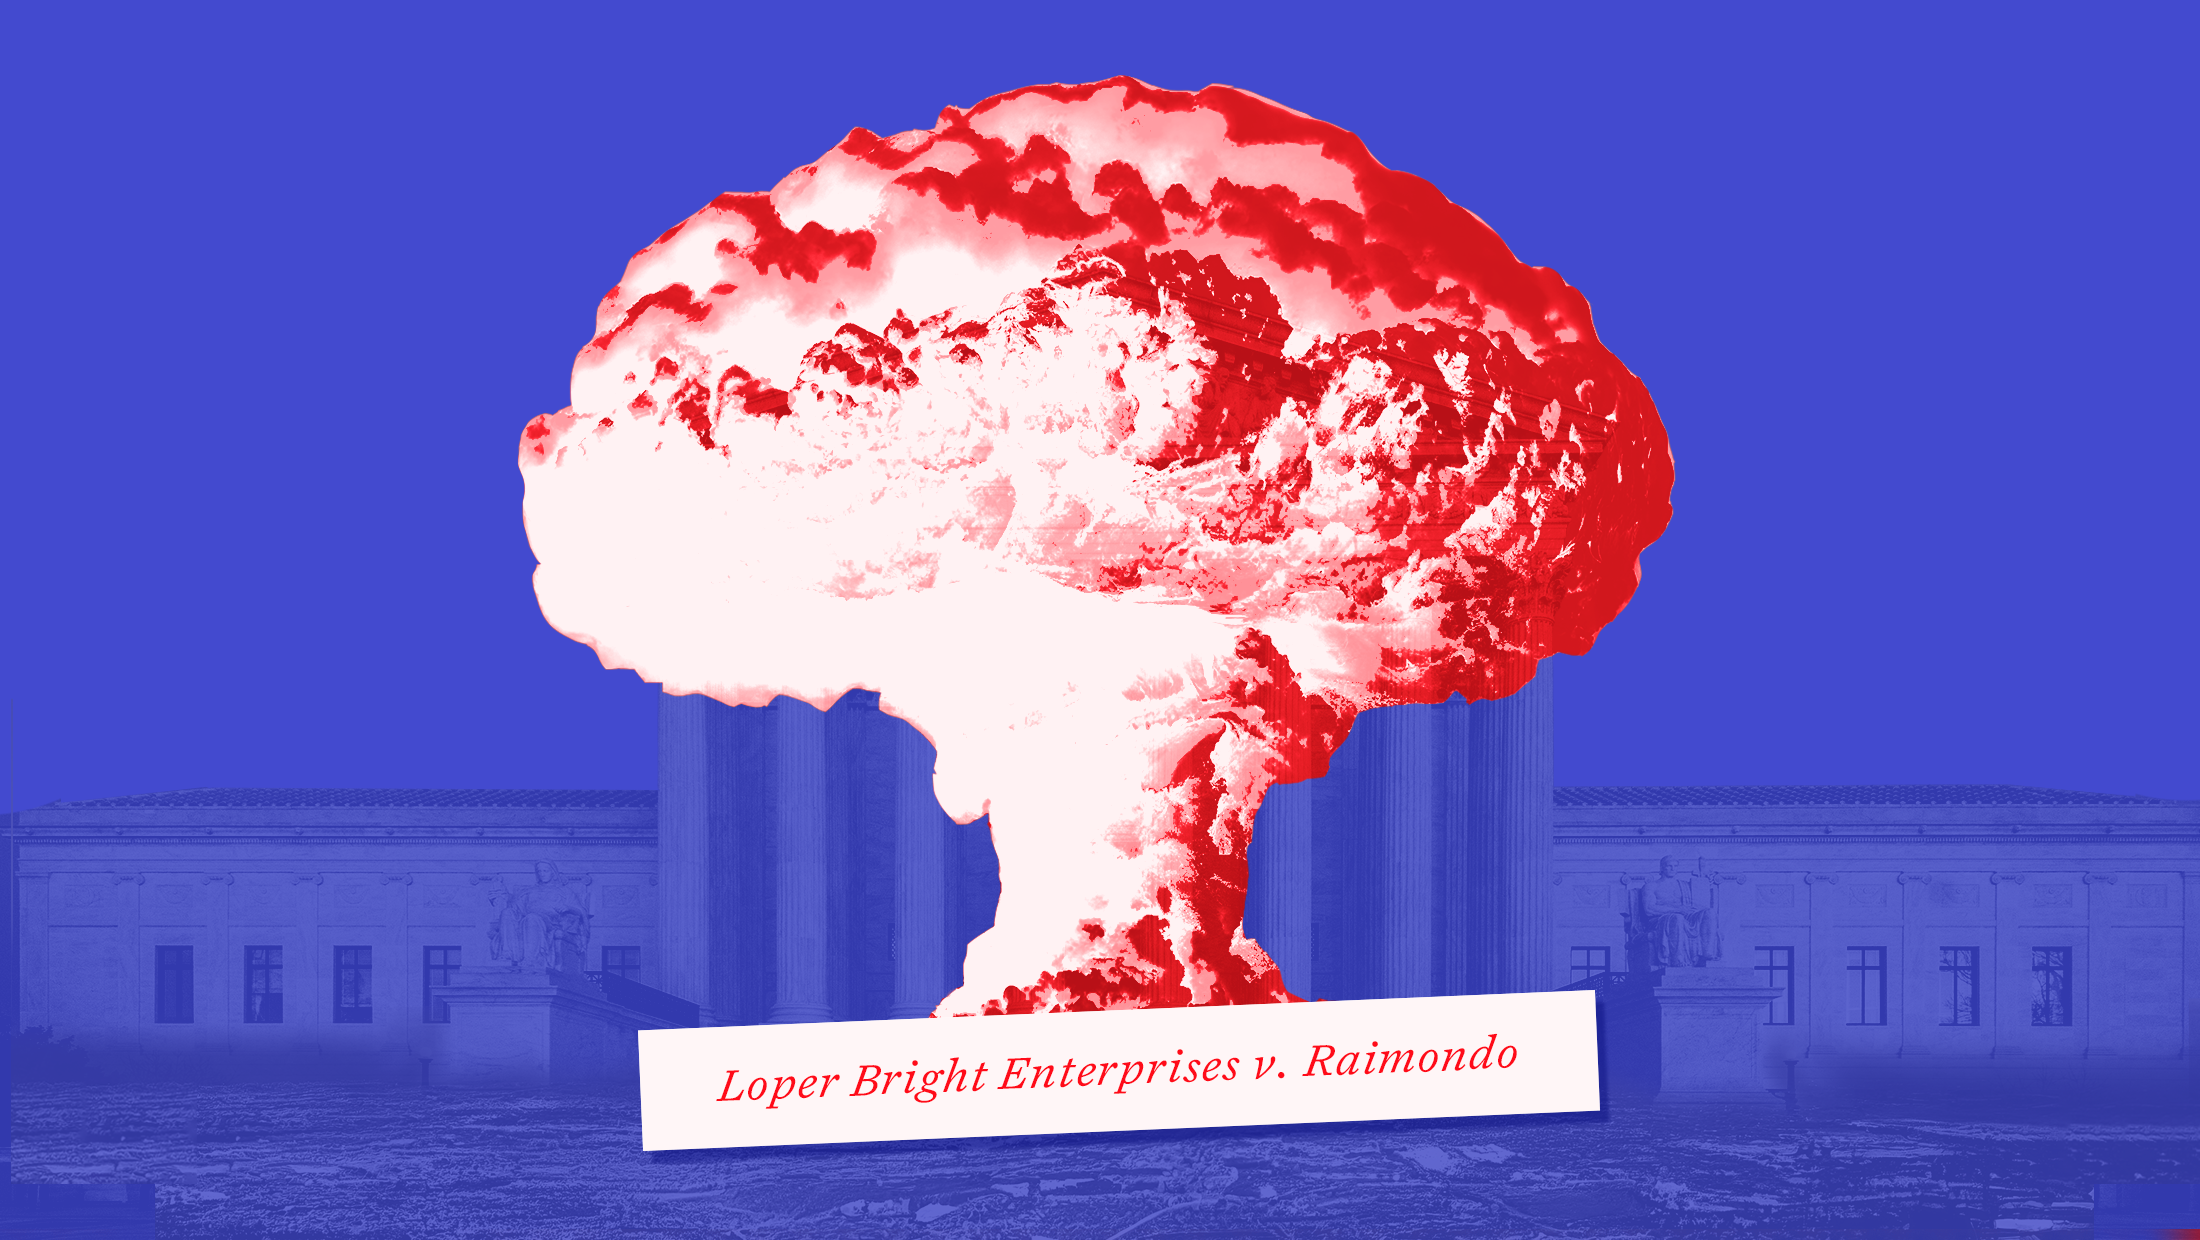 Blue background with U.S. Supreme Court faded into the background and a big red explosion of the nuclear bomb with the upcoming Supreme Court case -- Loper Bright Enterprises v. Raimondo -- written below it.